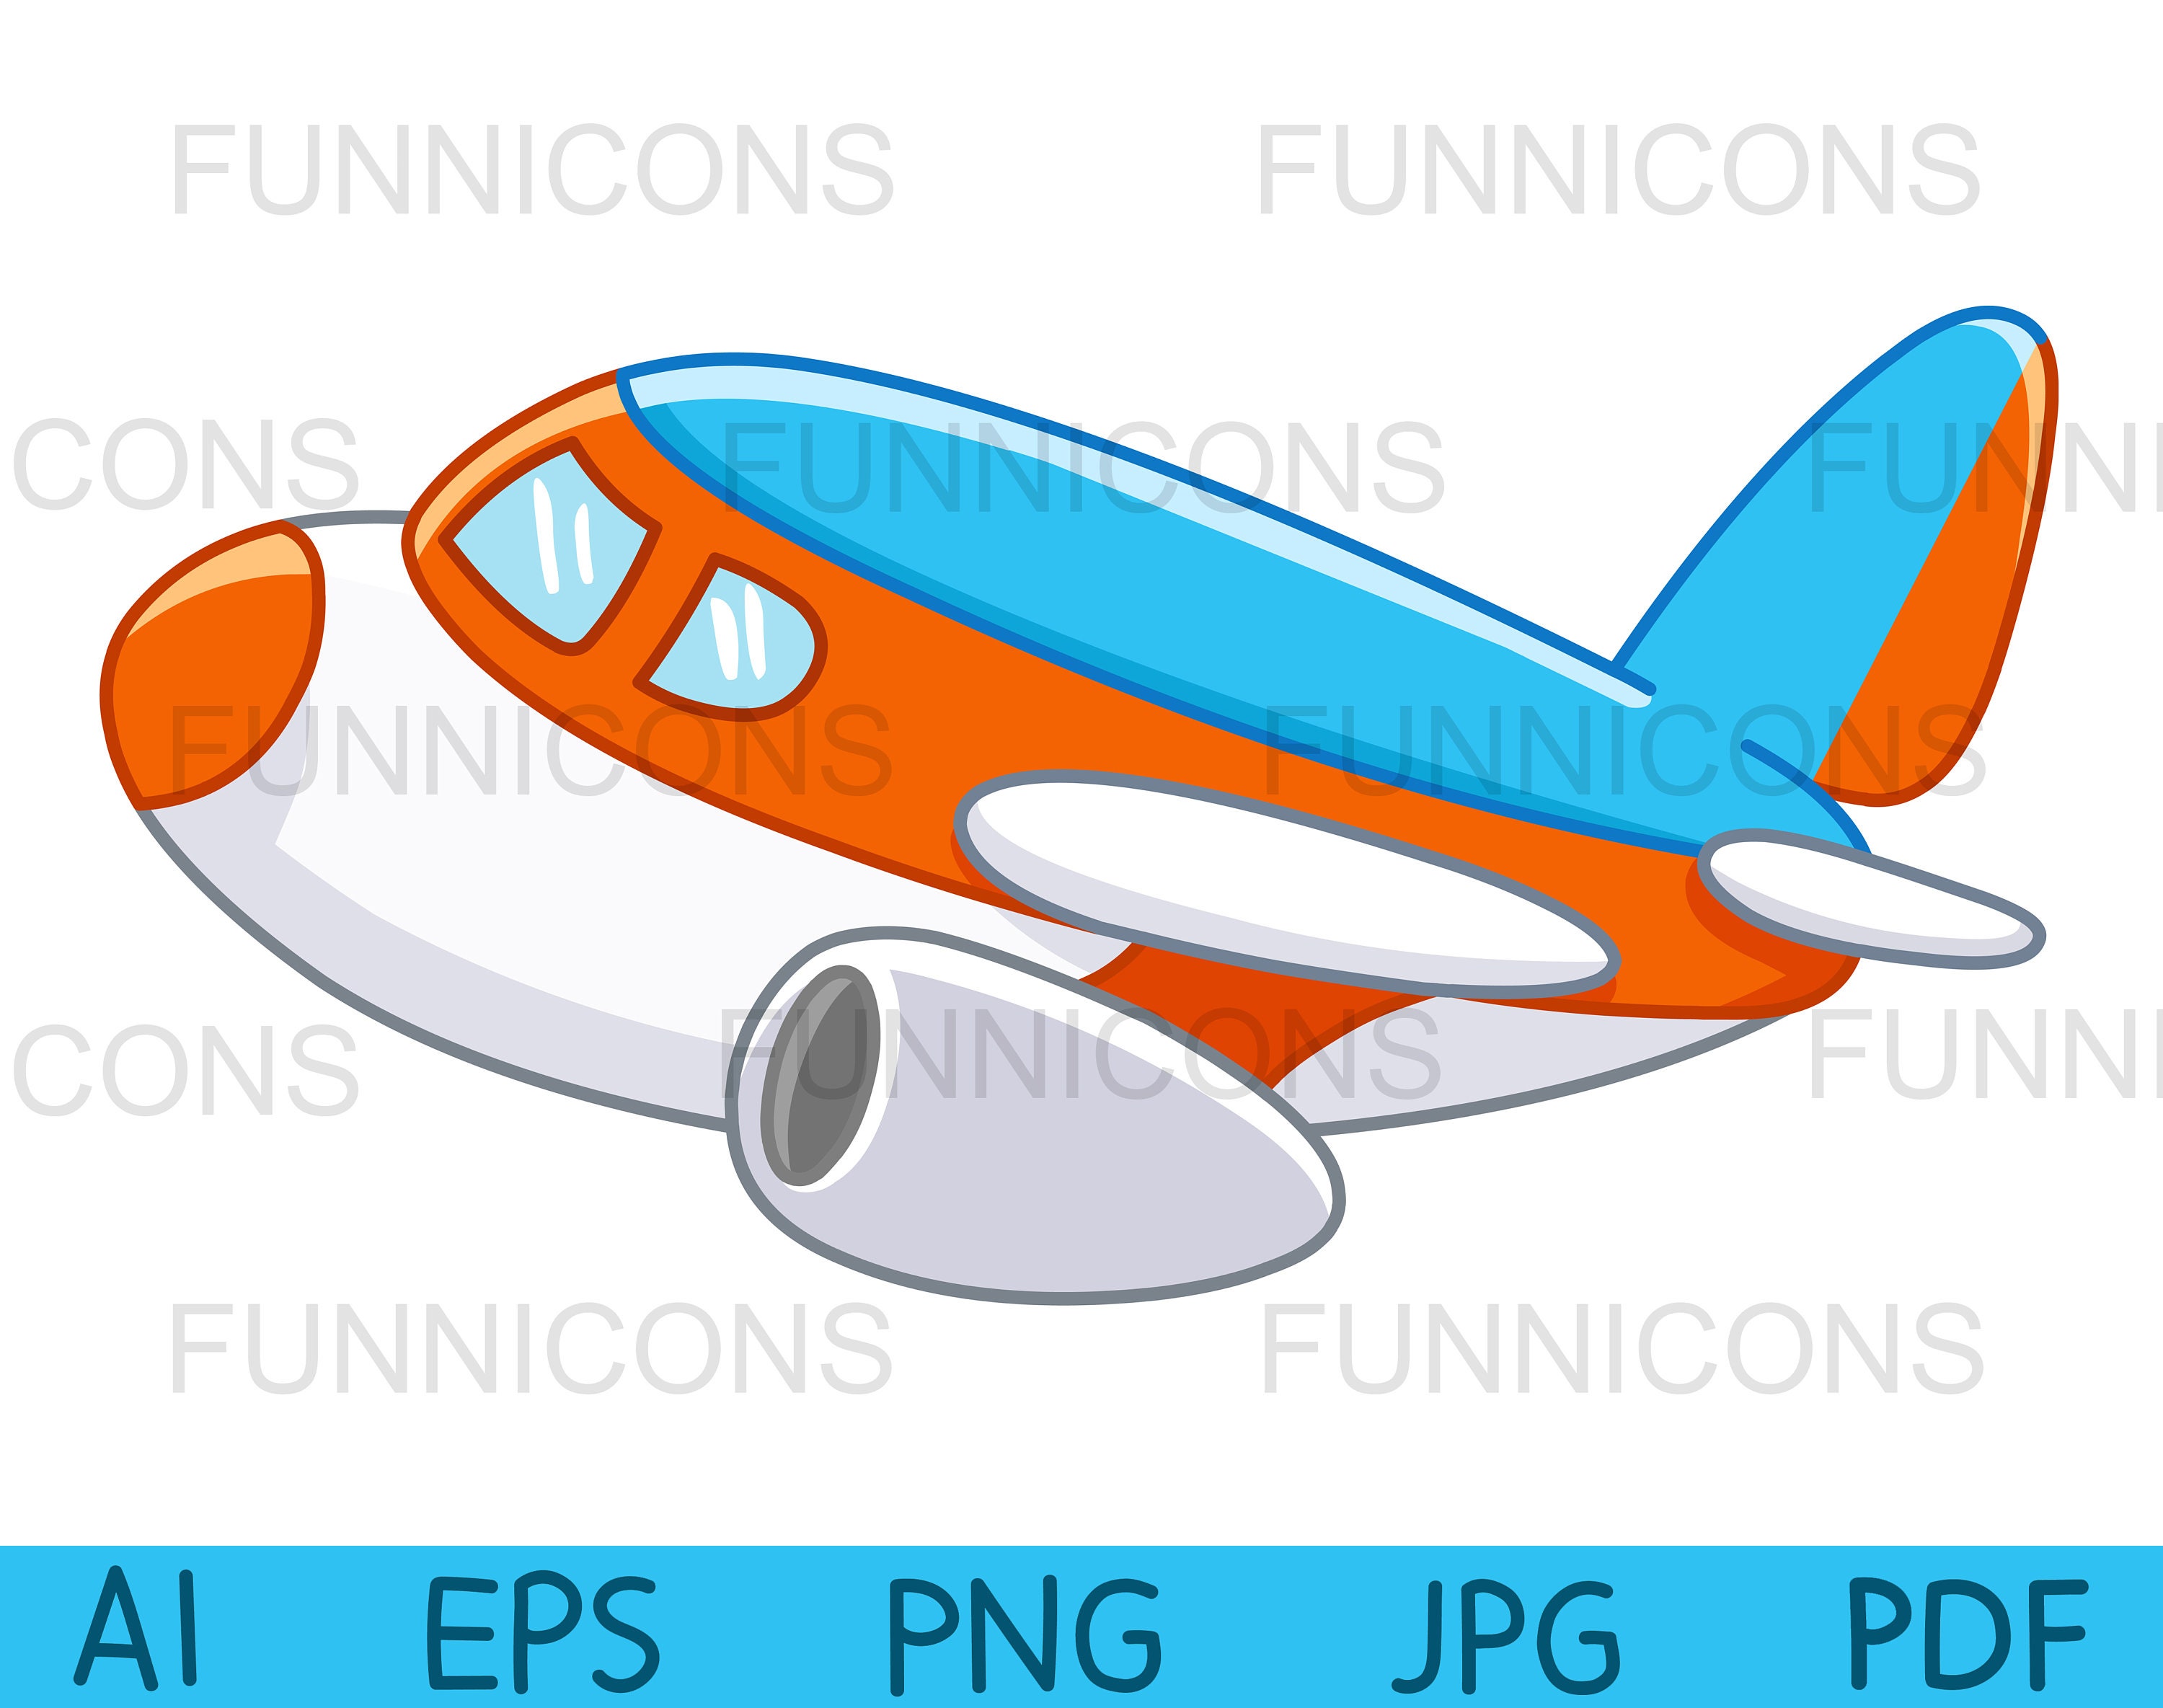 Clipart of a Cartoon Plane Ai Eps Png Jpg and Pdf Files - Etsy